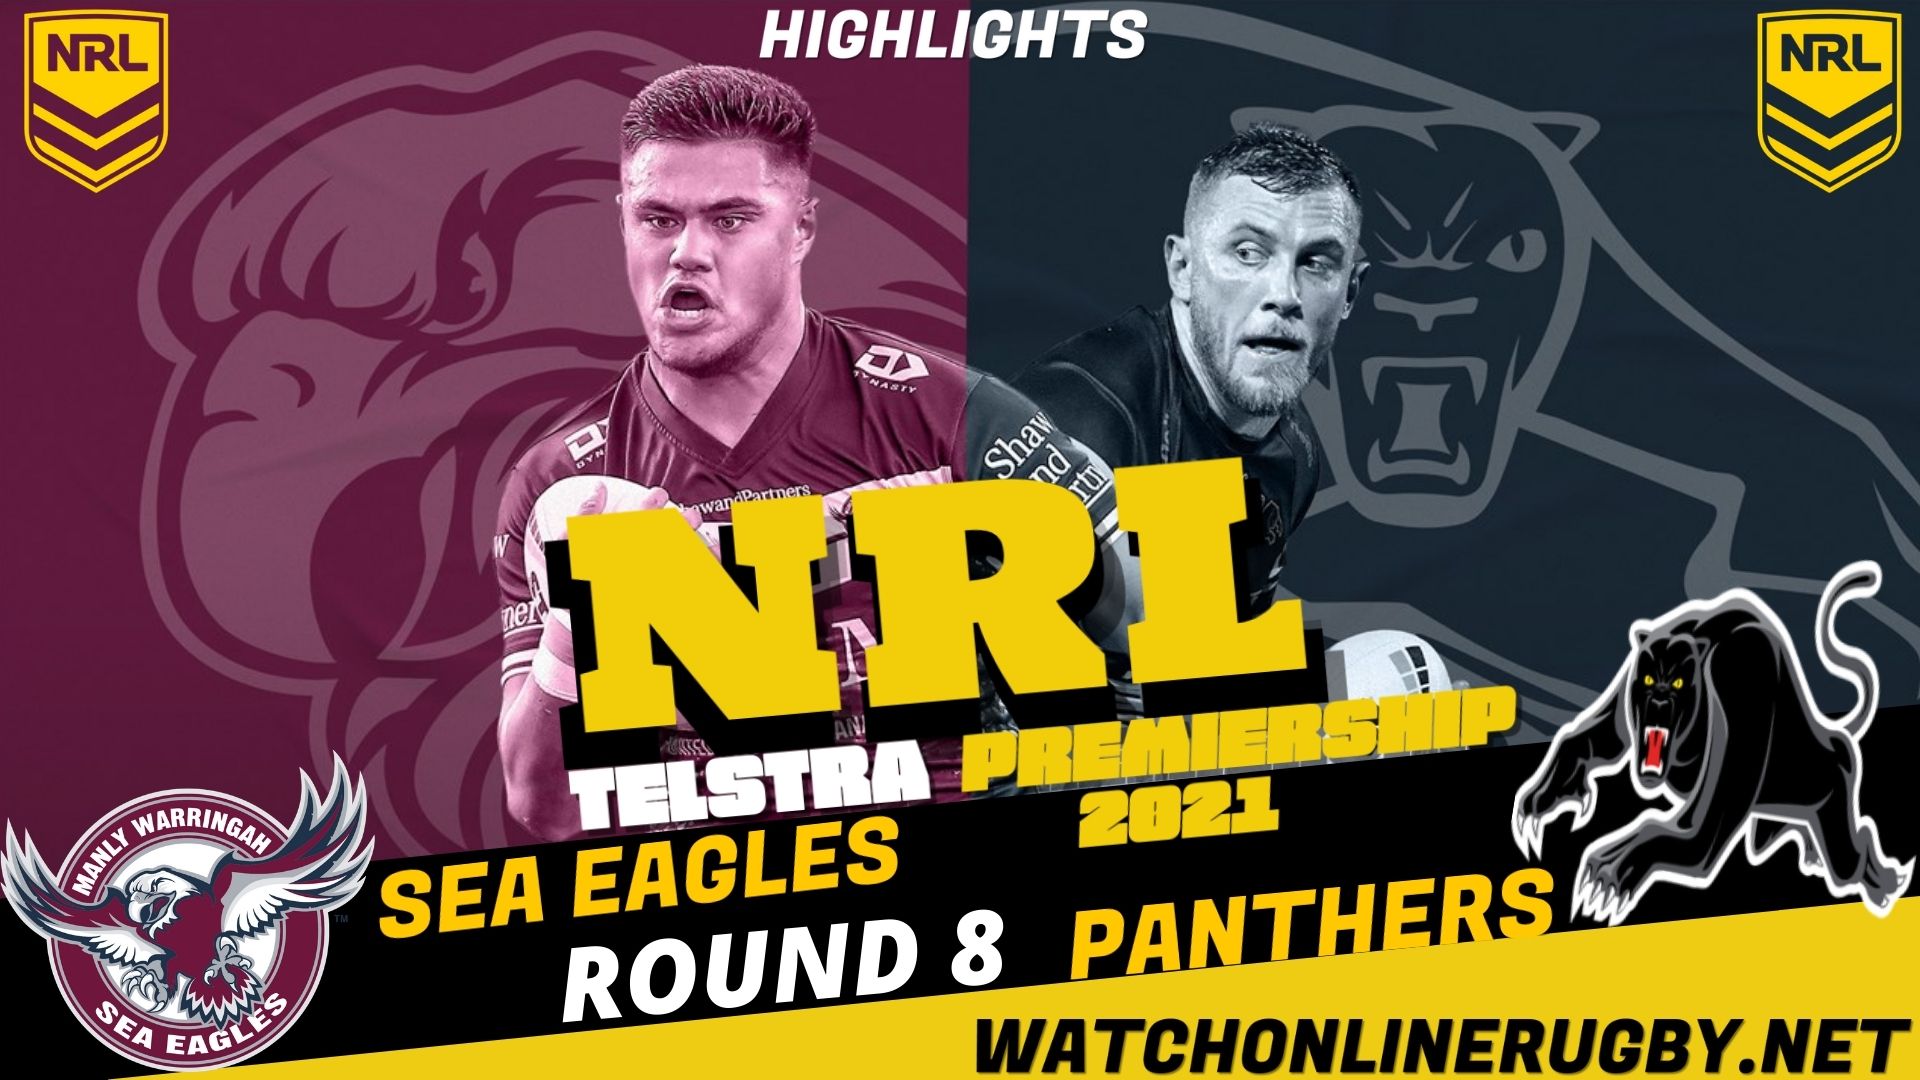 Panthers Vs Sea Eagles Highlights RD 8 NRL Rugby